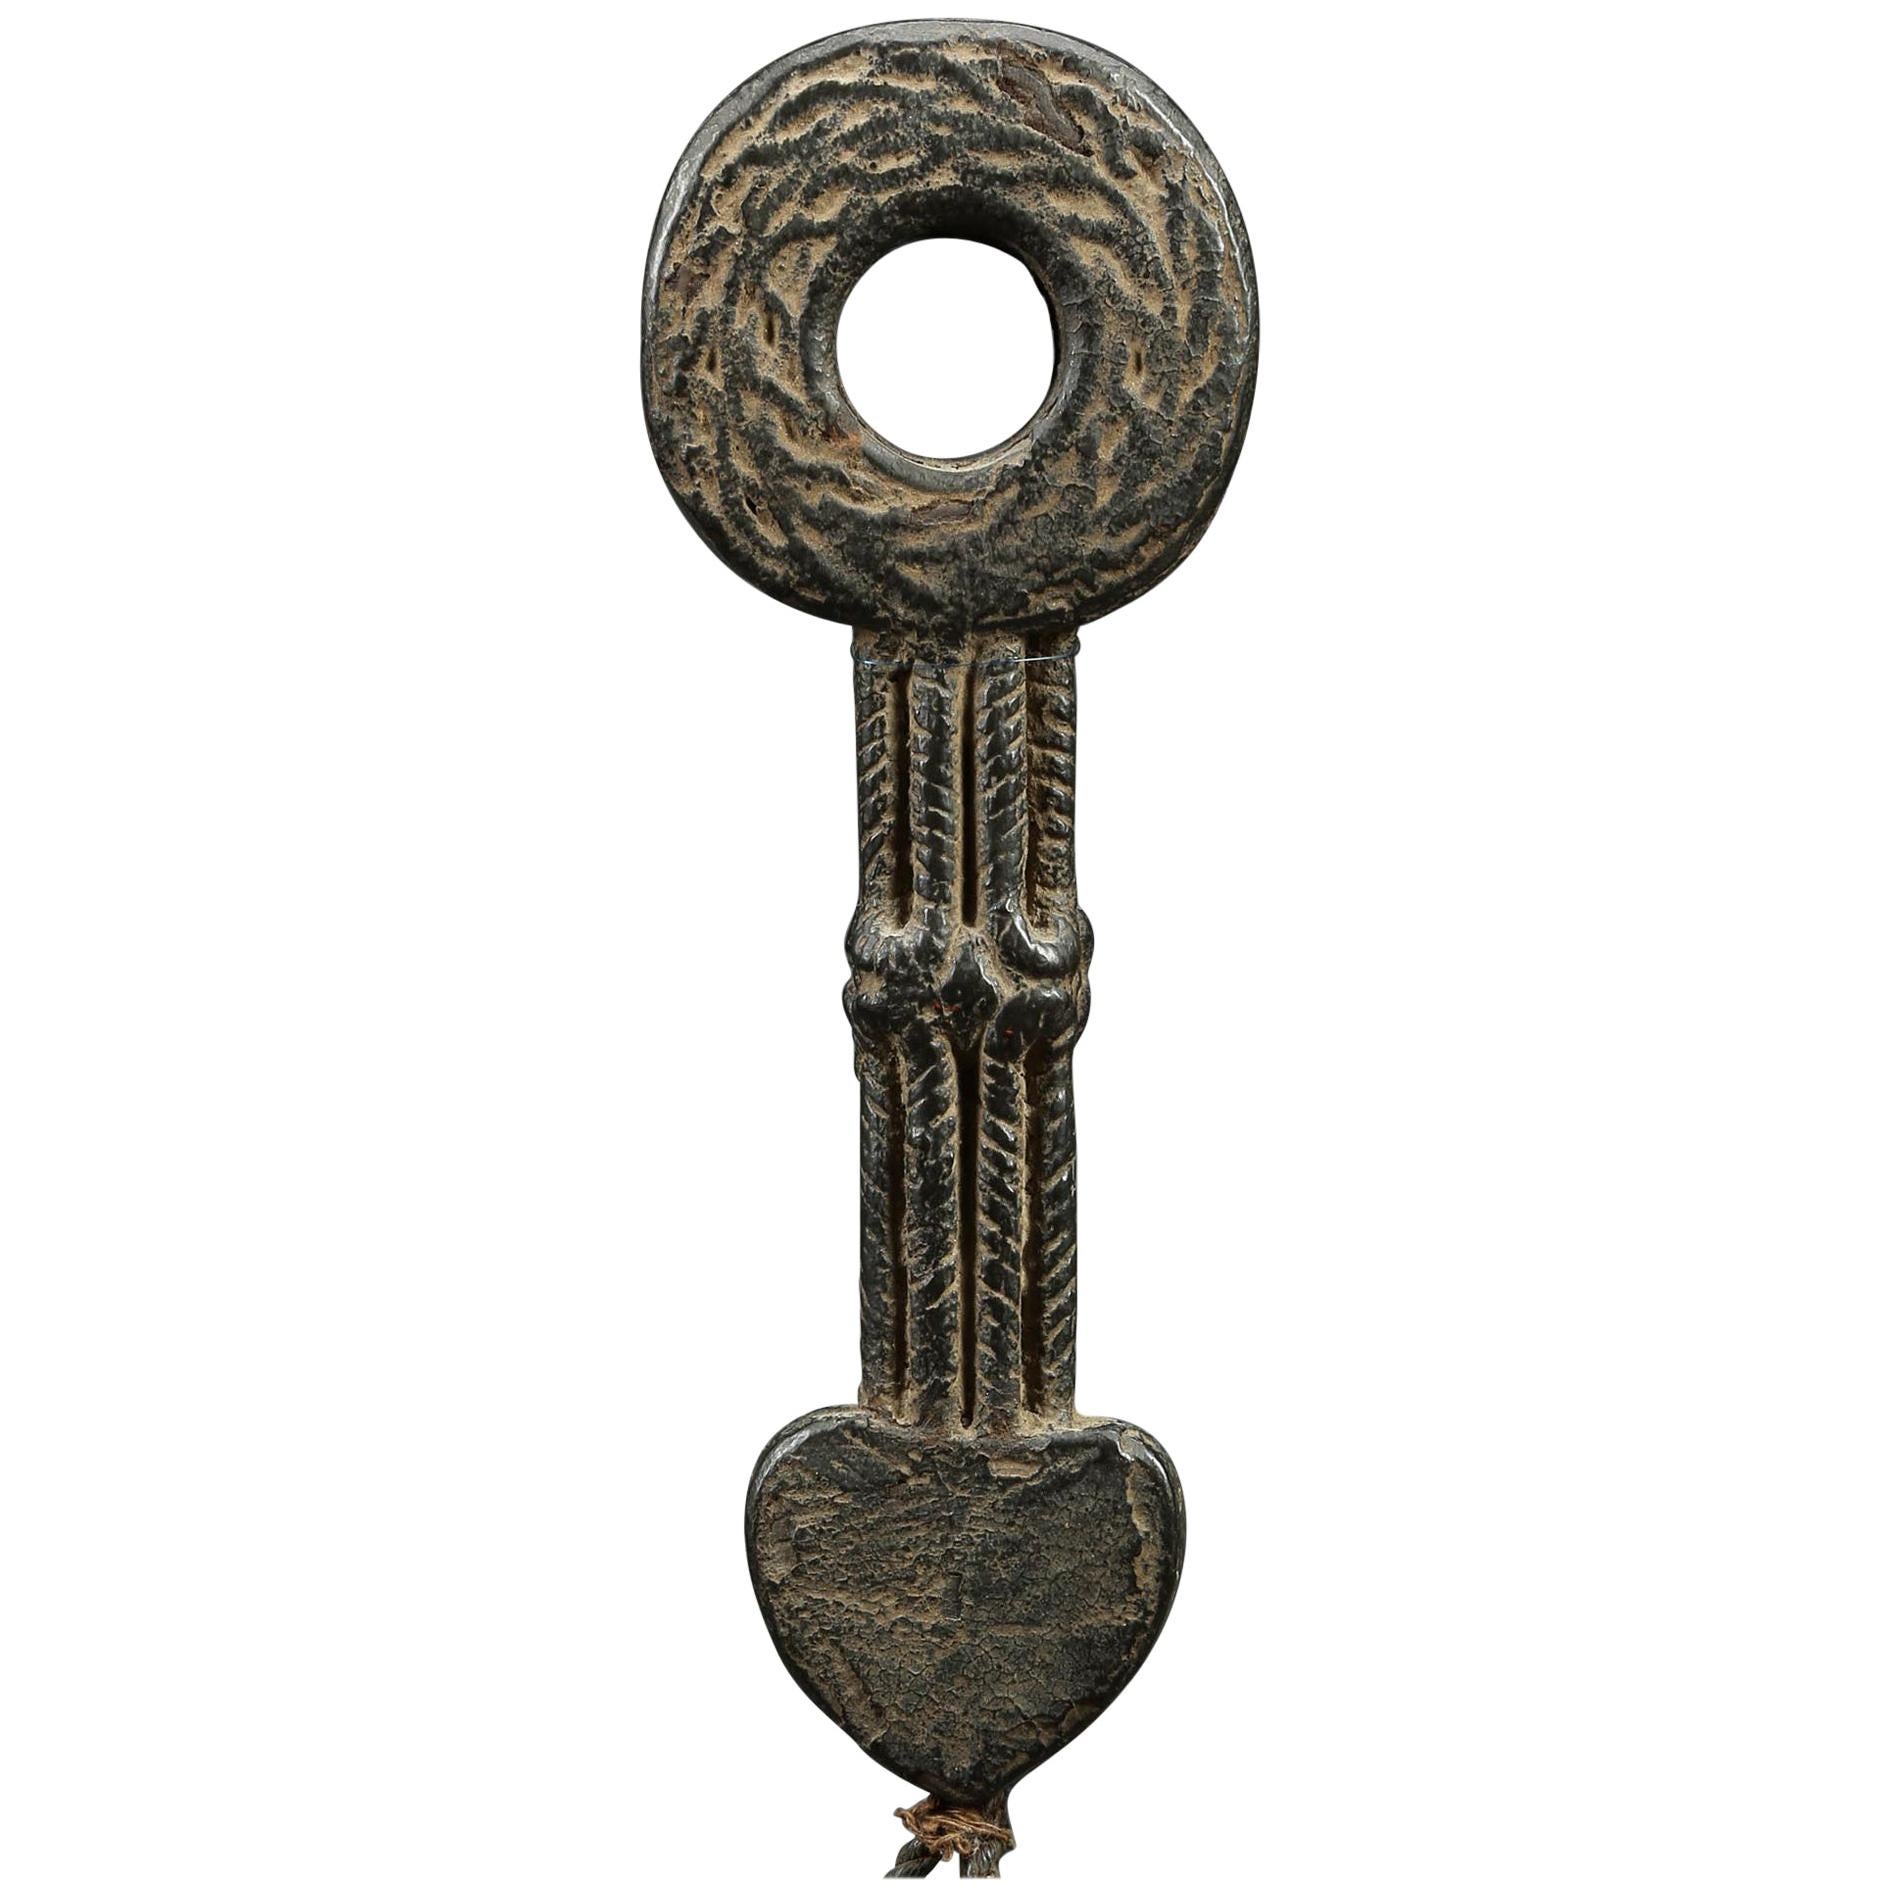 Nepal Himalayan Butter Churn Handle, Early 20th Century with Heart Shape For Sale